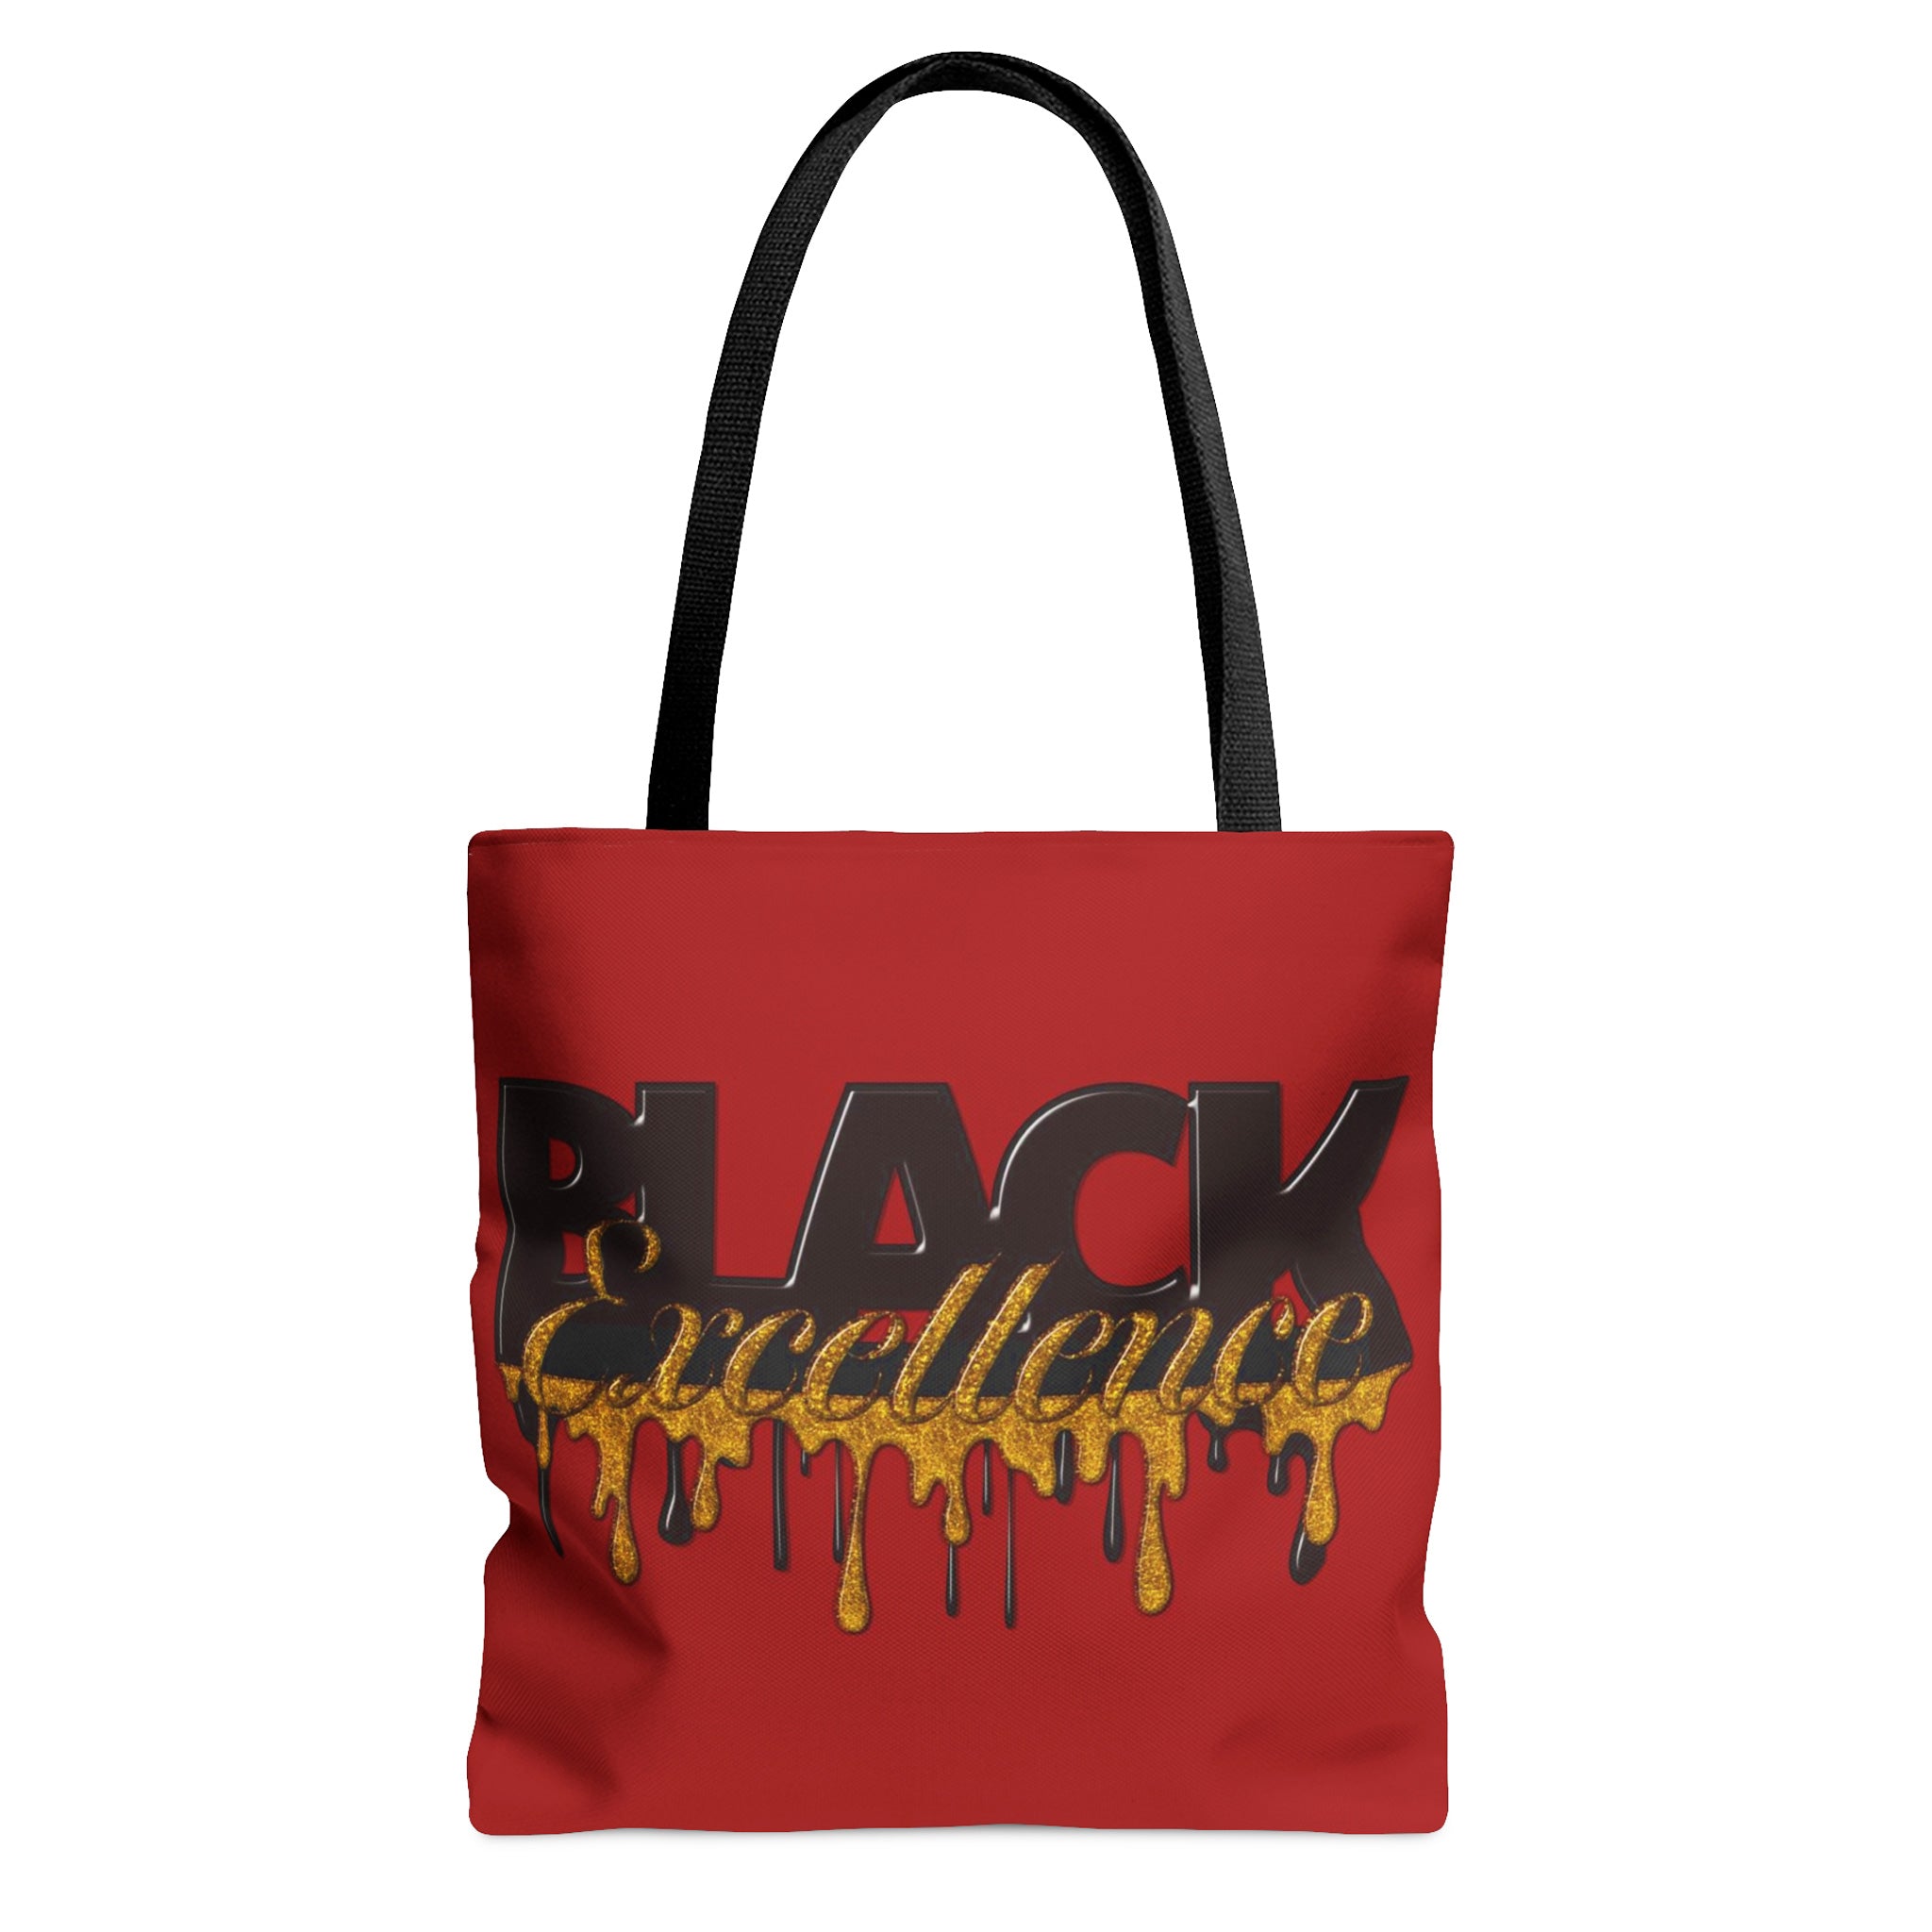 Black Excellence Tote Bag - front view.